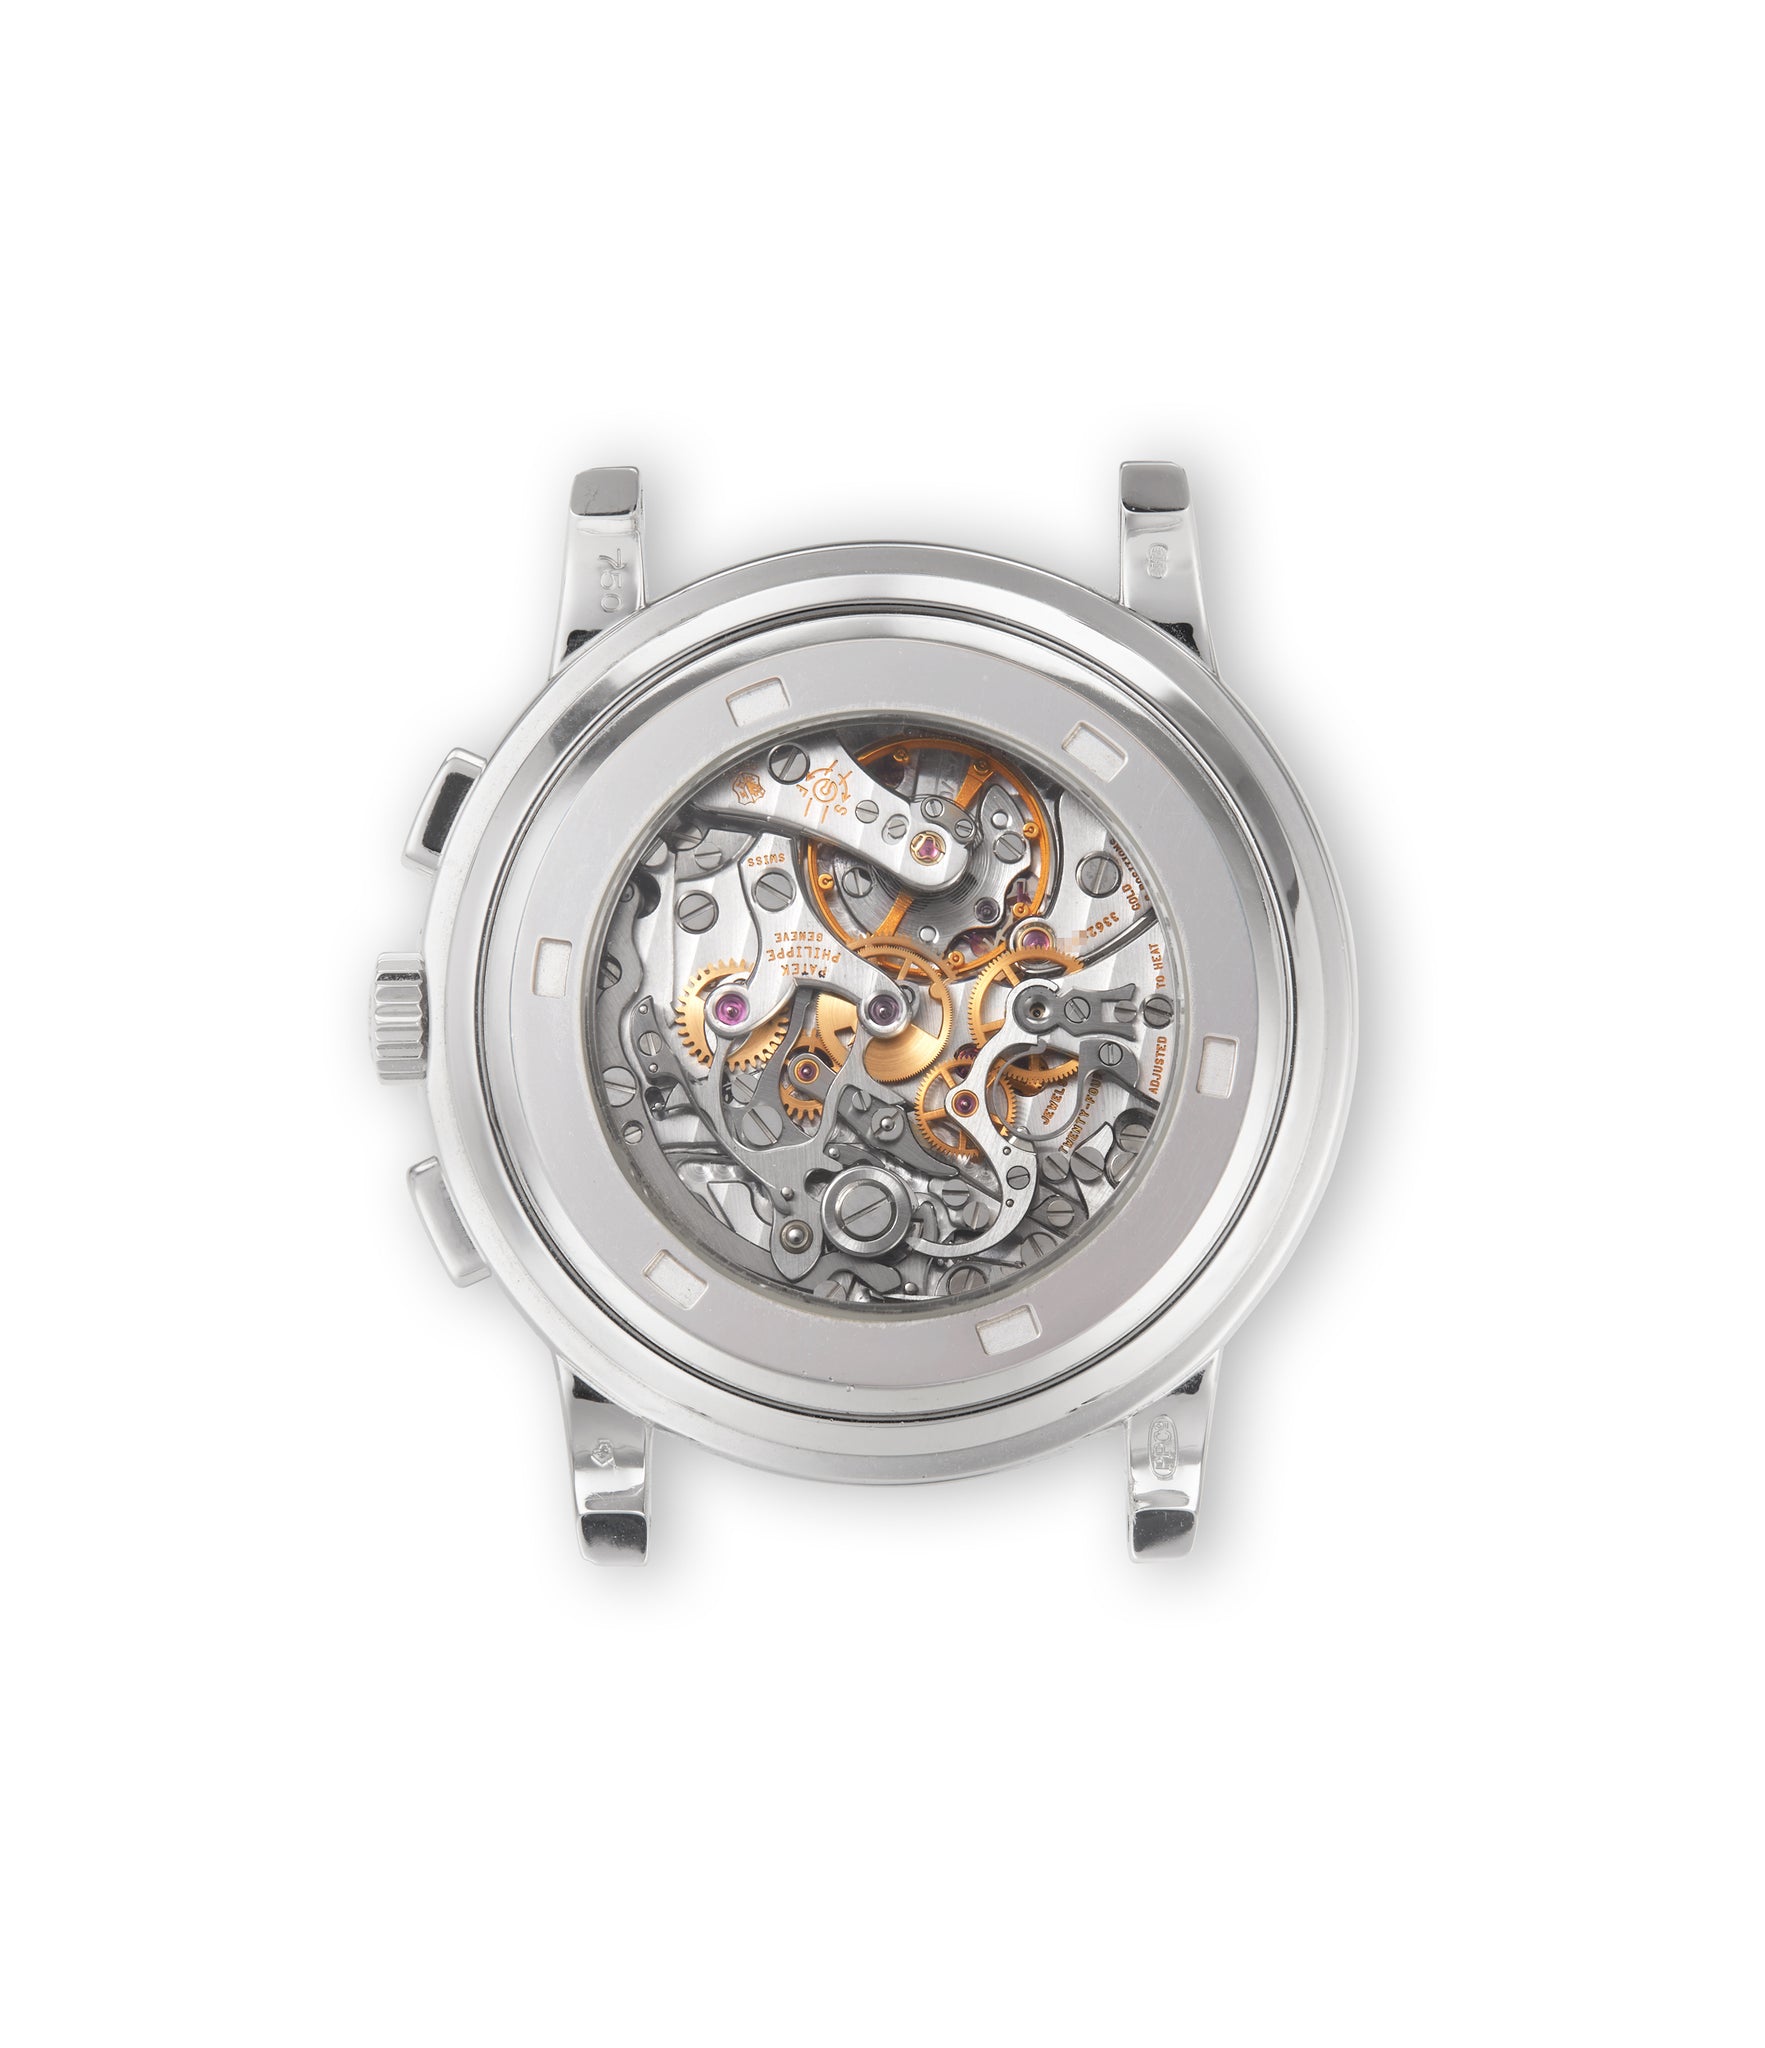 caseback Patek Philippe Chronograph 5070G-001 White Gold preowned watch at A Collected Man London